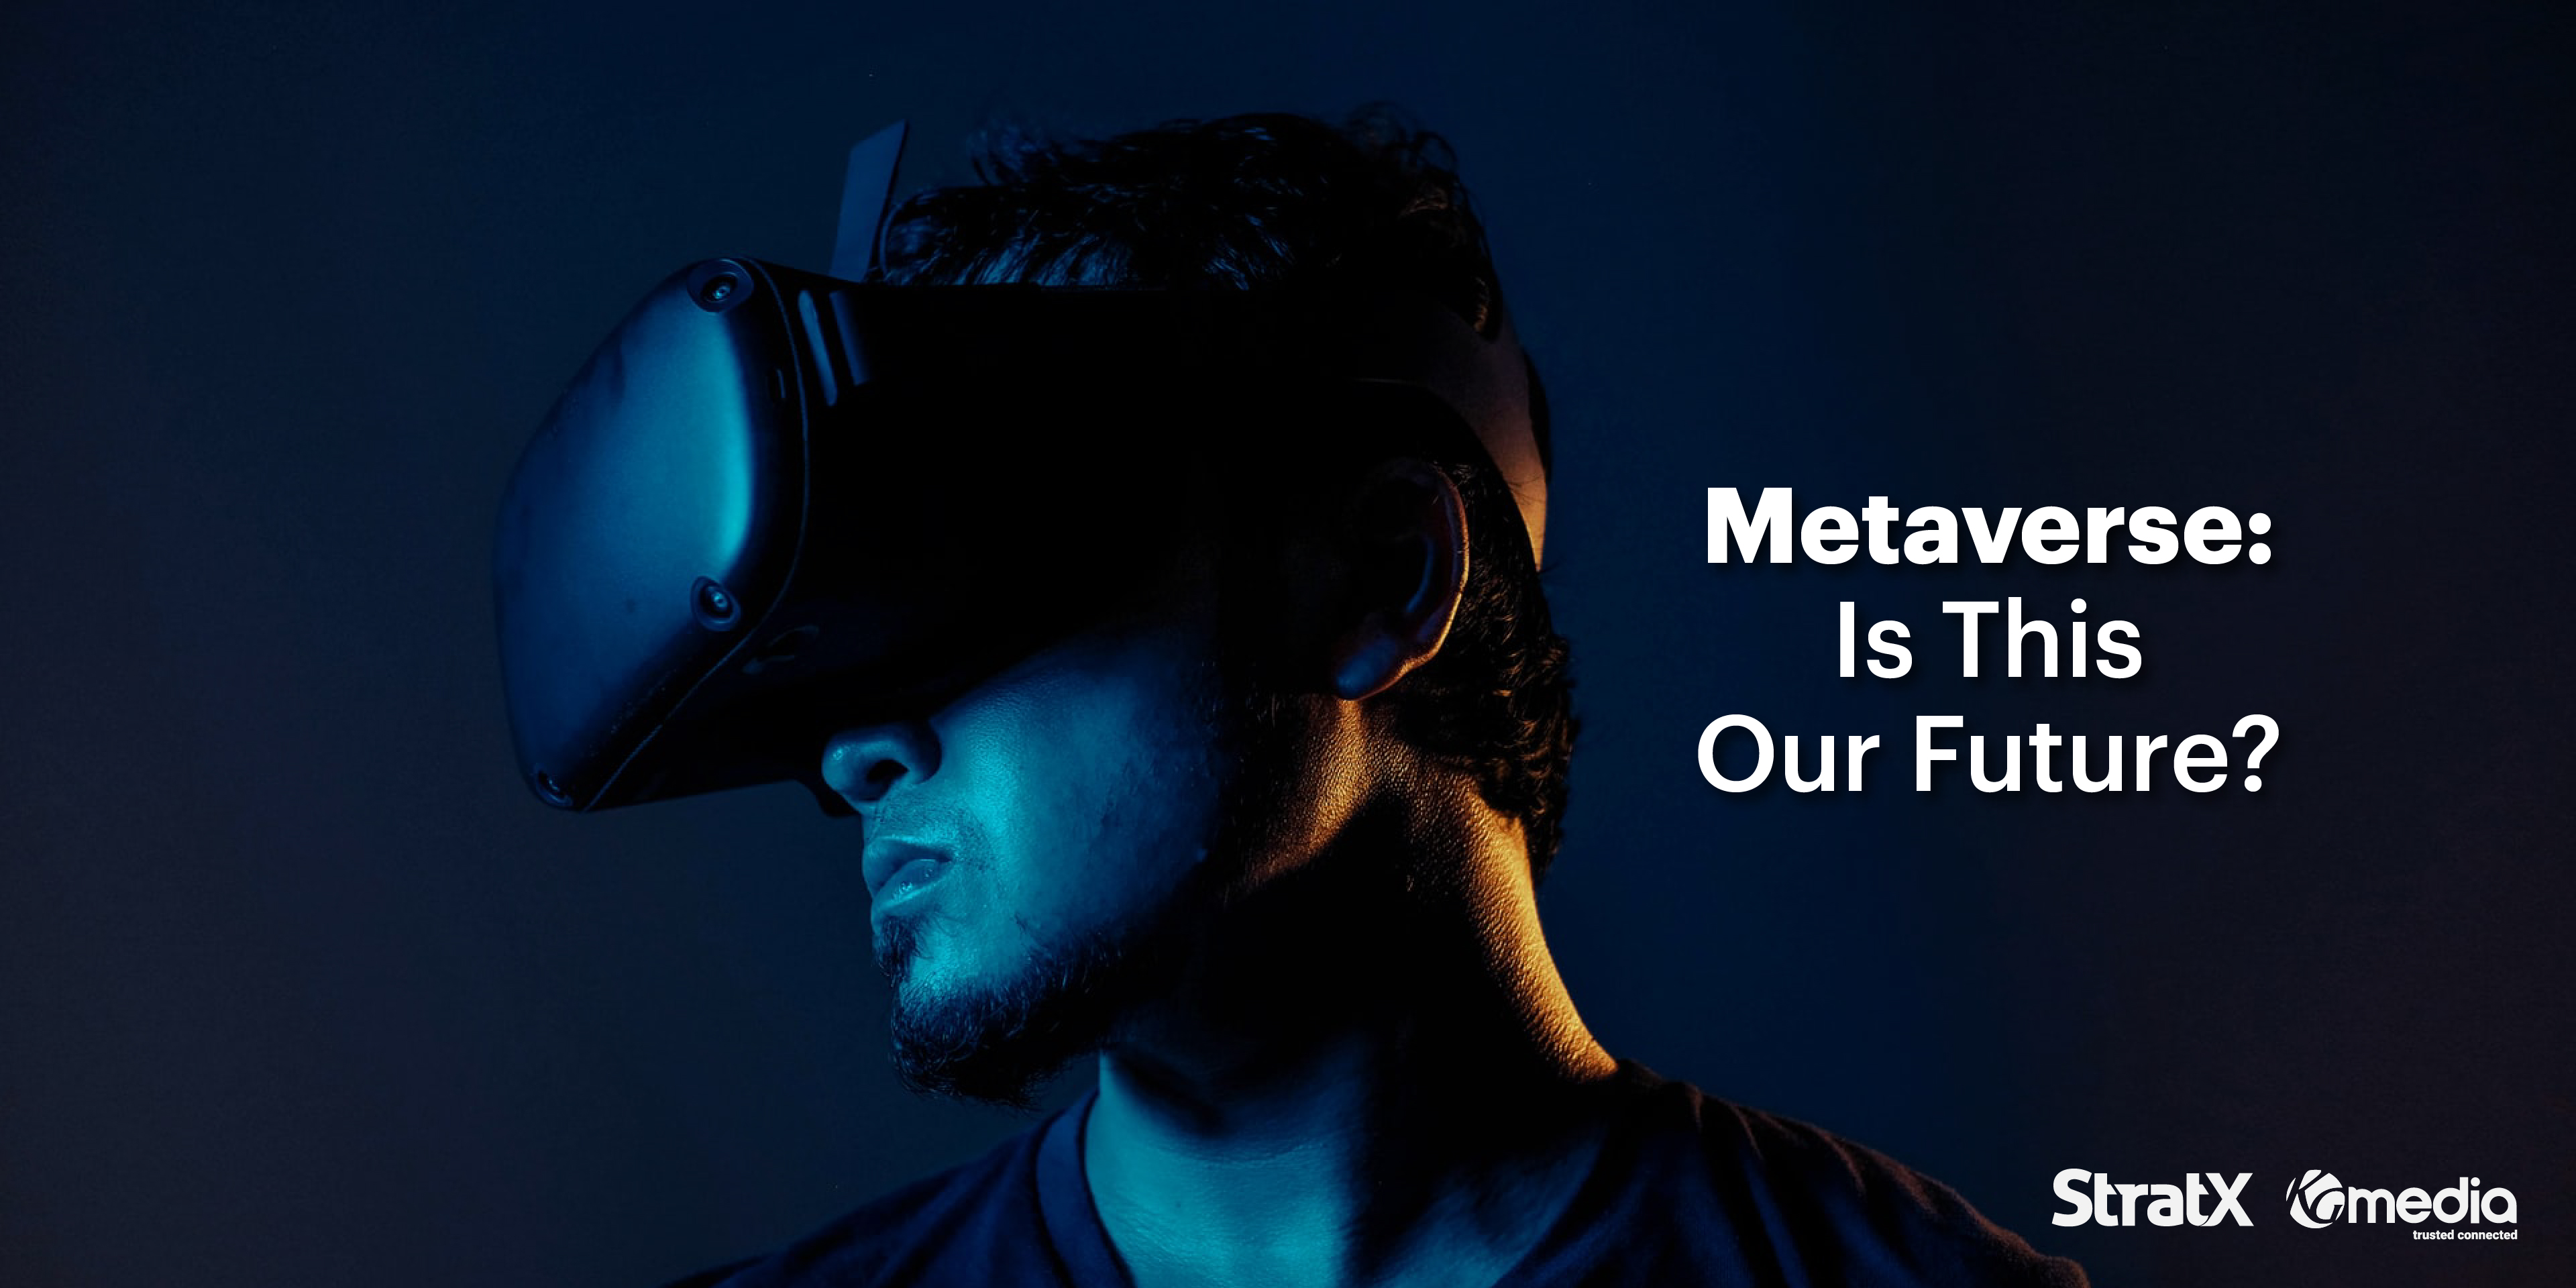 Metaverse could be the future of mankind